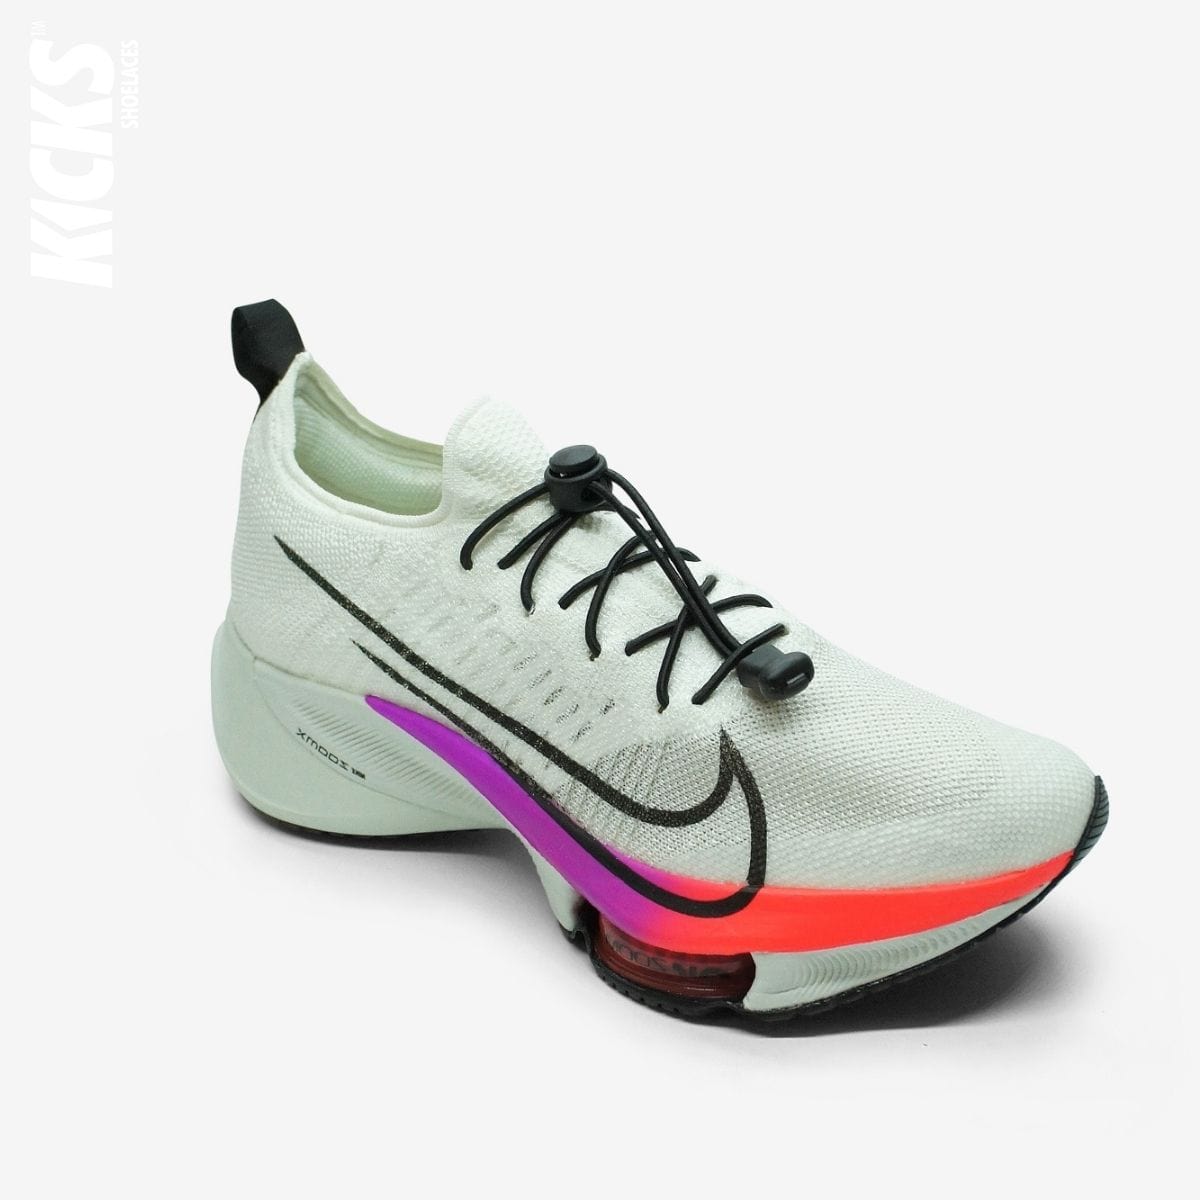 quick-laces-with-black-elastic-no-tie-shoelaces-on-nike-running-shoe-by-kicks-shoelaces